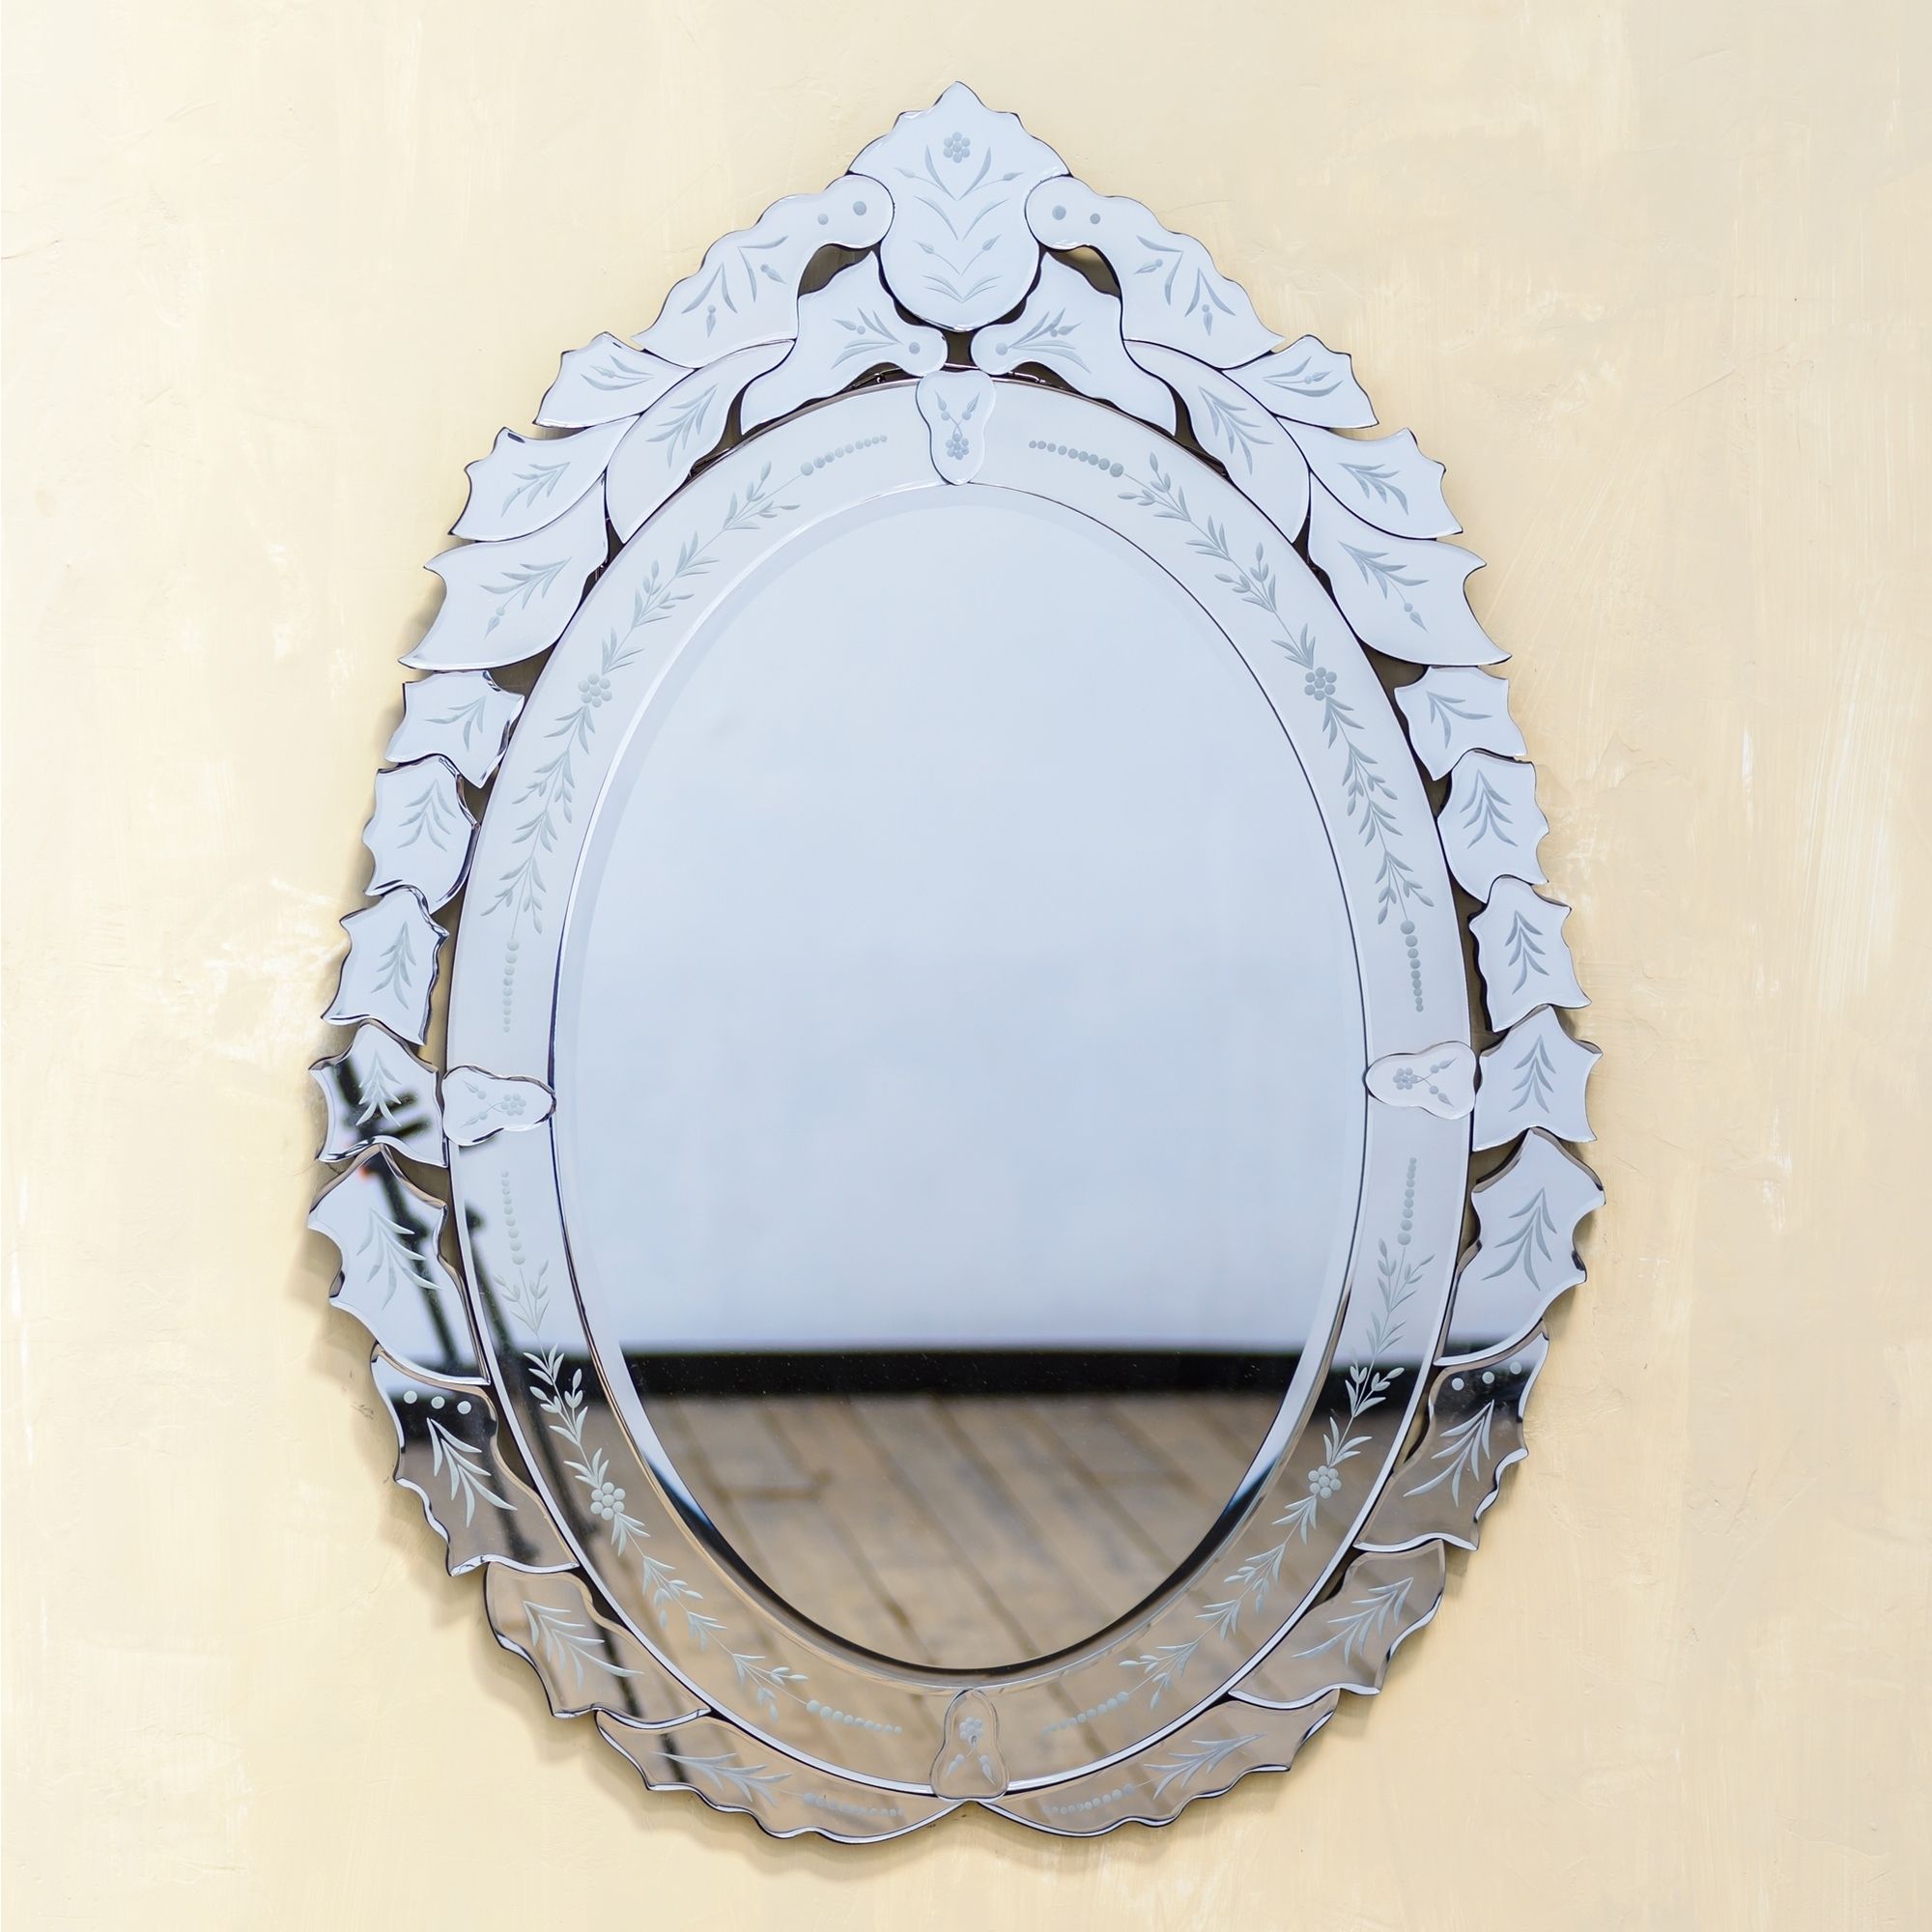 Venetian Contemporary Oval Mirror With Floral Pattern Bezels Regarding Bronze Beaded Oval Cut Mirrors (View 11 of 15)